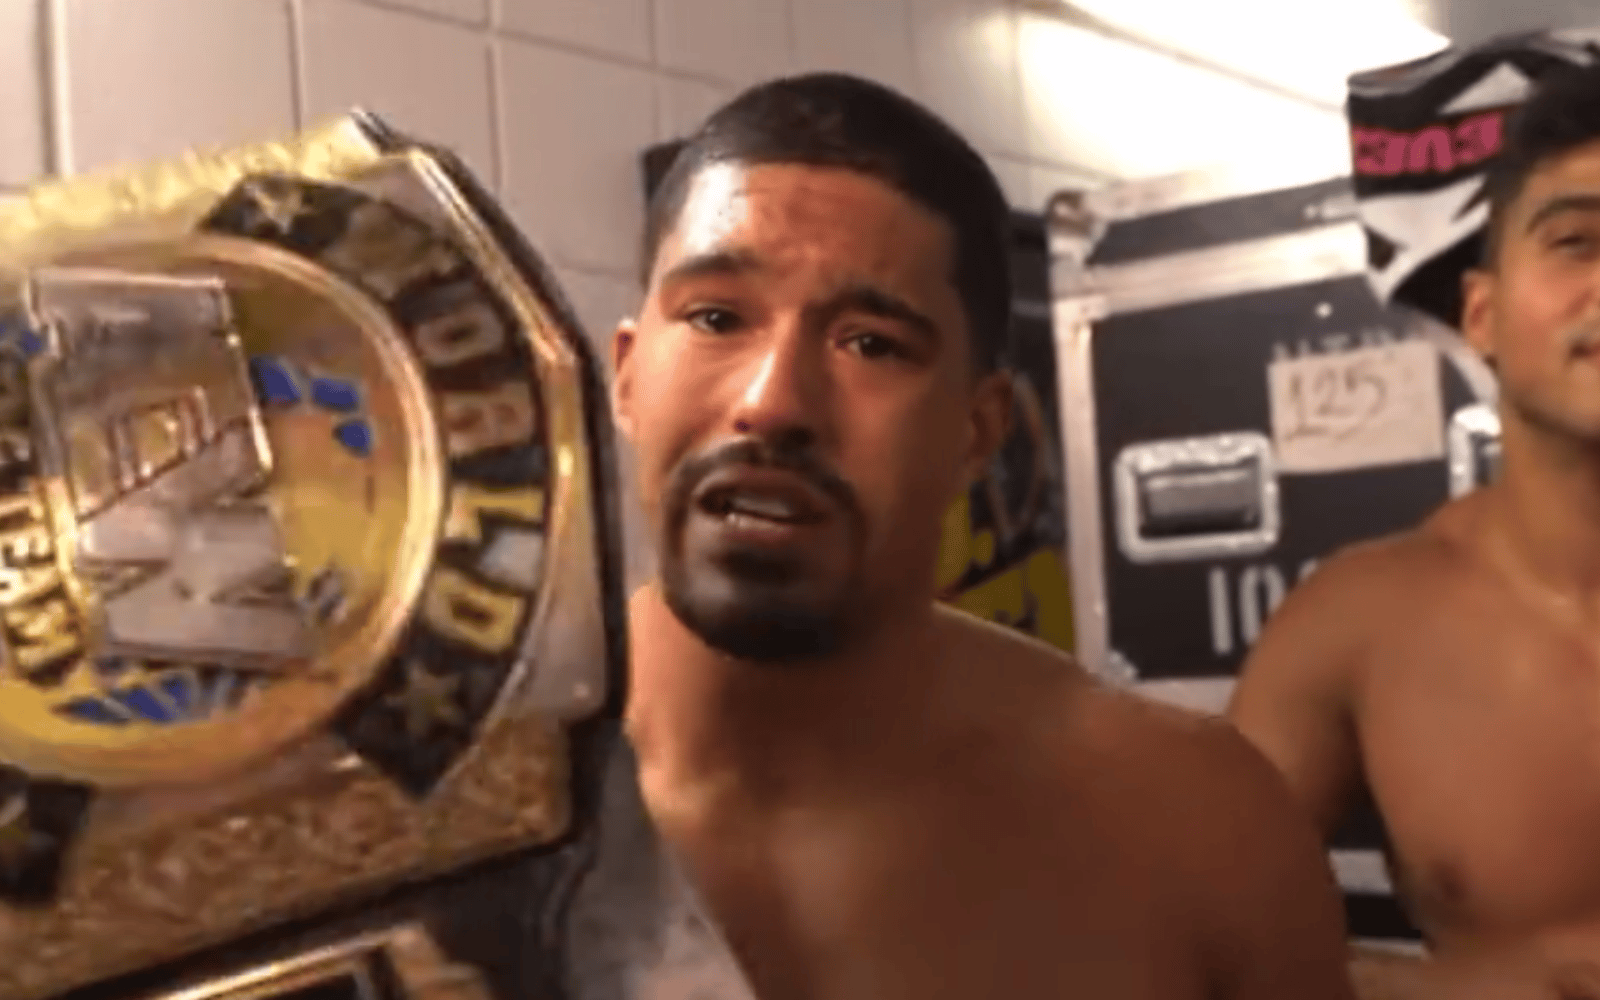 Gay pro-wrestler Anthony Bowens on AEW win: ‘I never thought I’d have a moment like this’